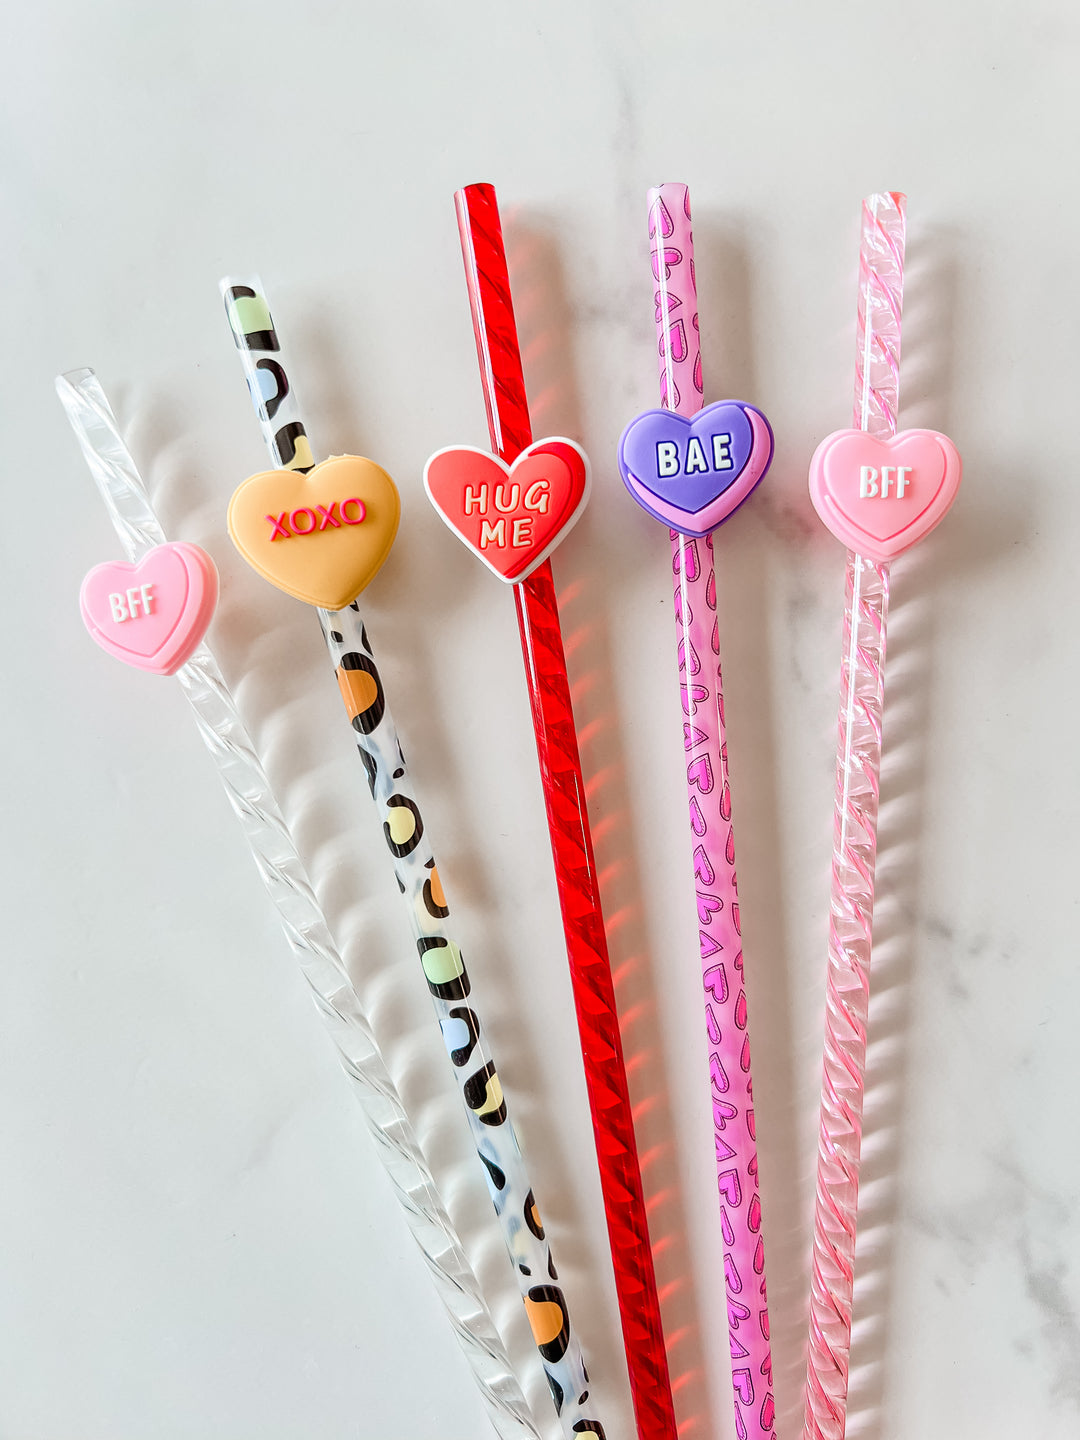 Buy Wholesale China Wholesale Straw Topper Charms Bulk Reusable